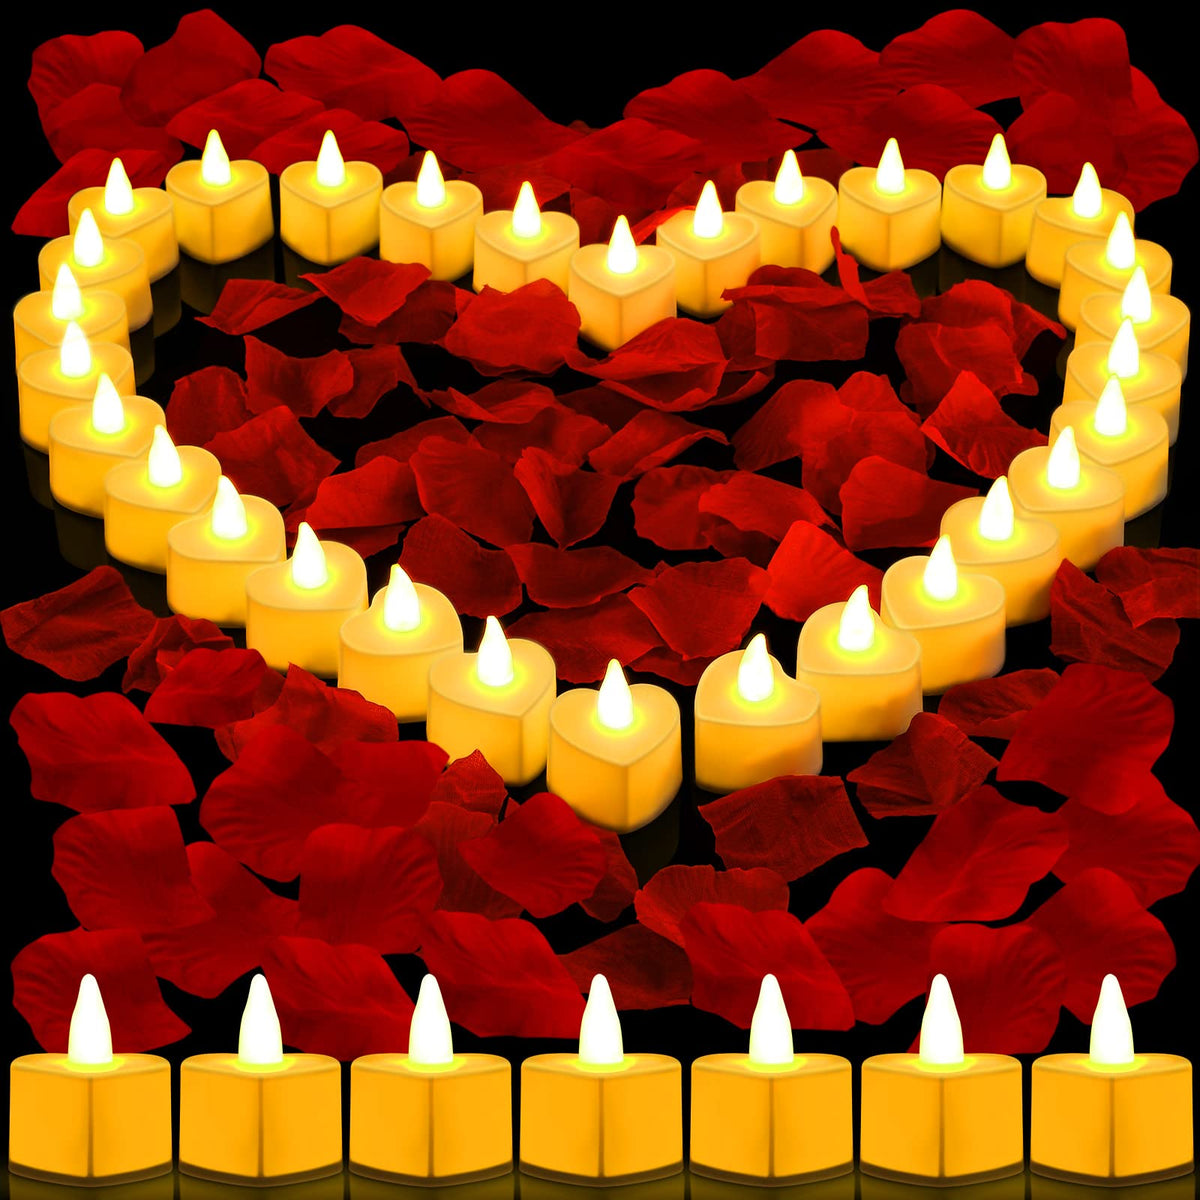 Red Metallic Heart-Shaped Battery-Operated Tea Light Candles - 12